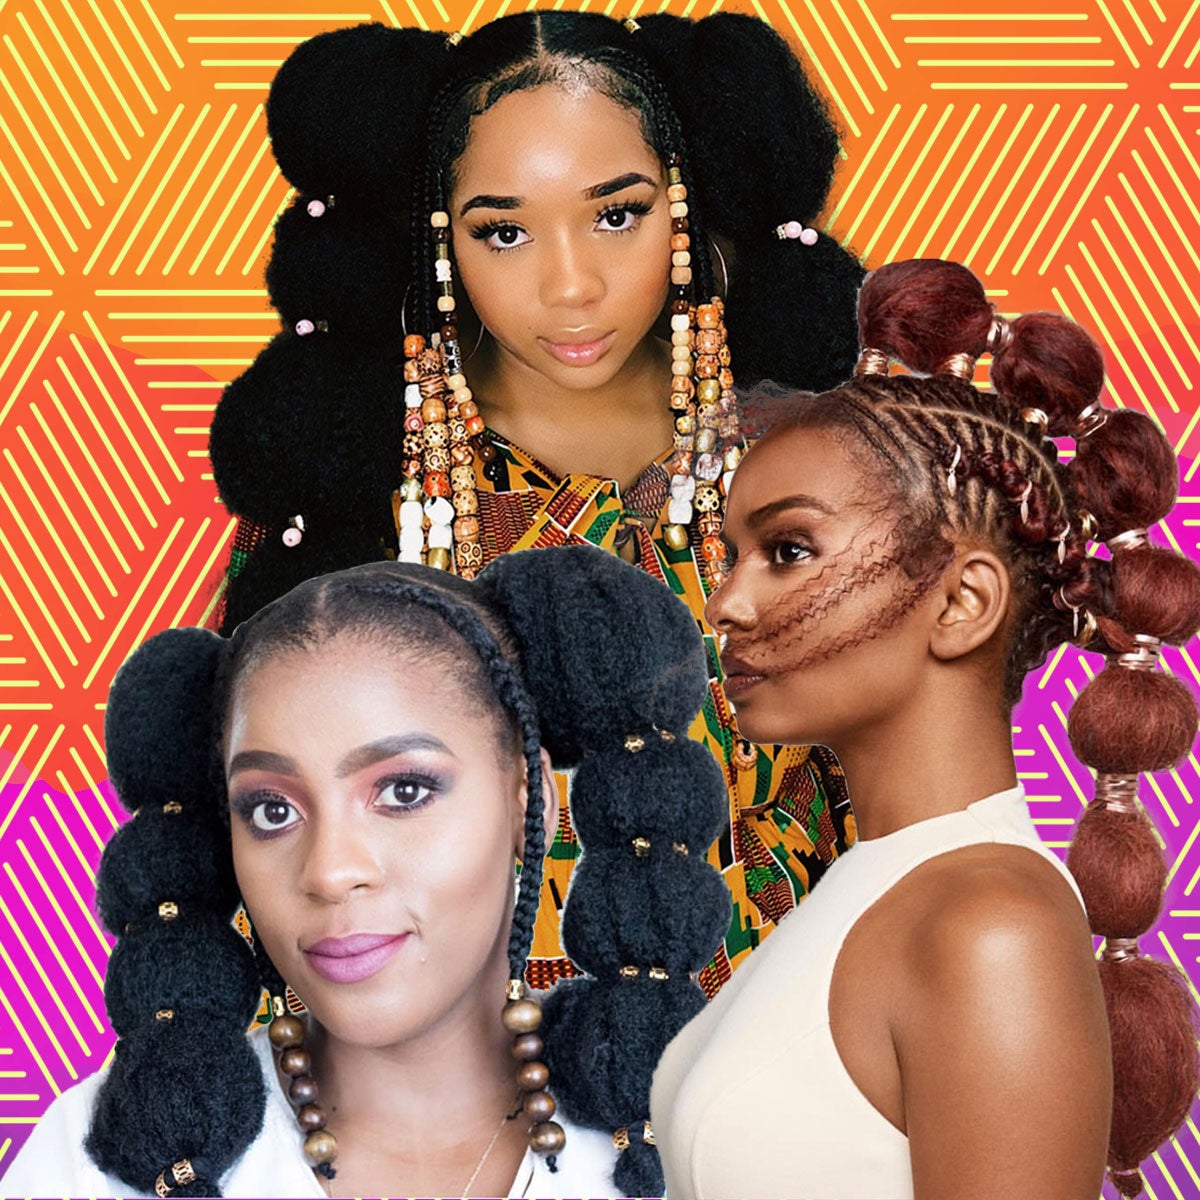 Puffballs Are The Latest Protective Style Taking Over The Internet - Essence